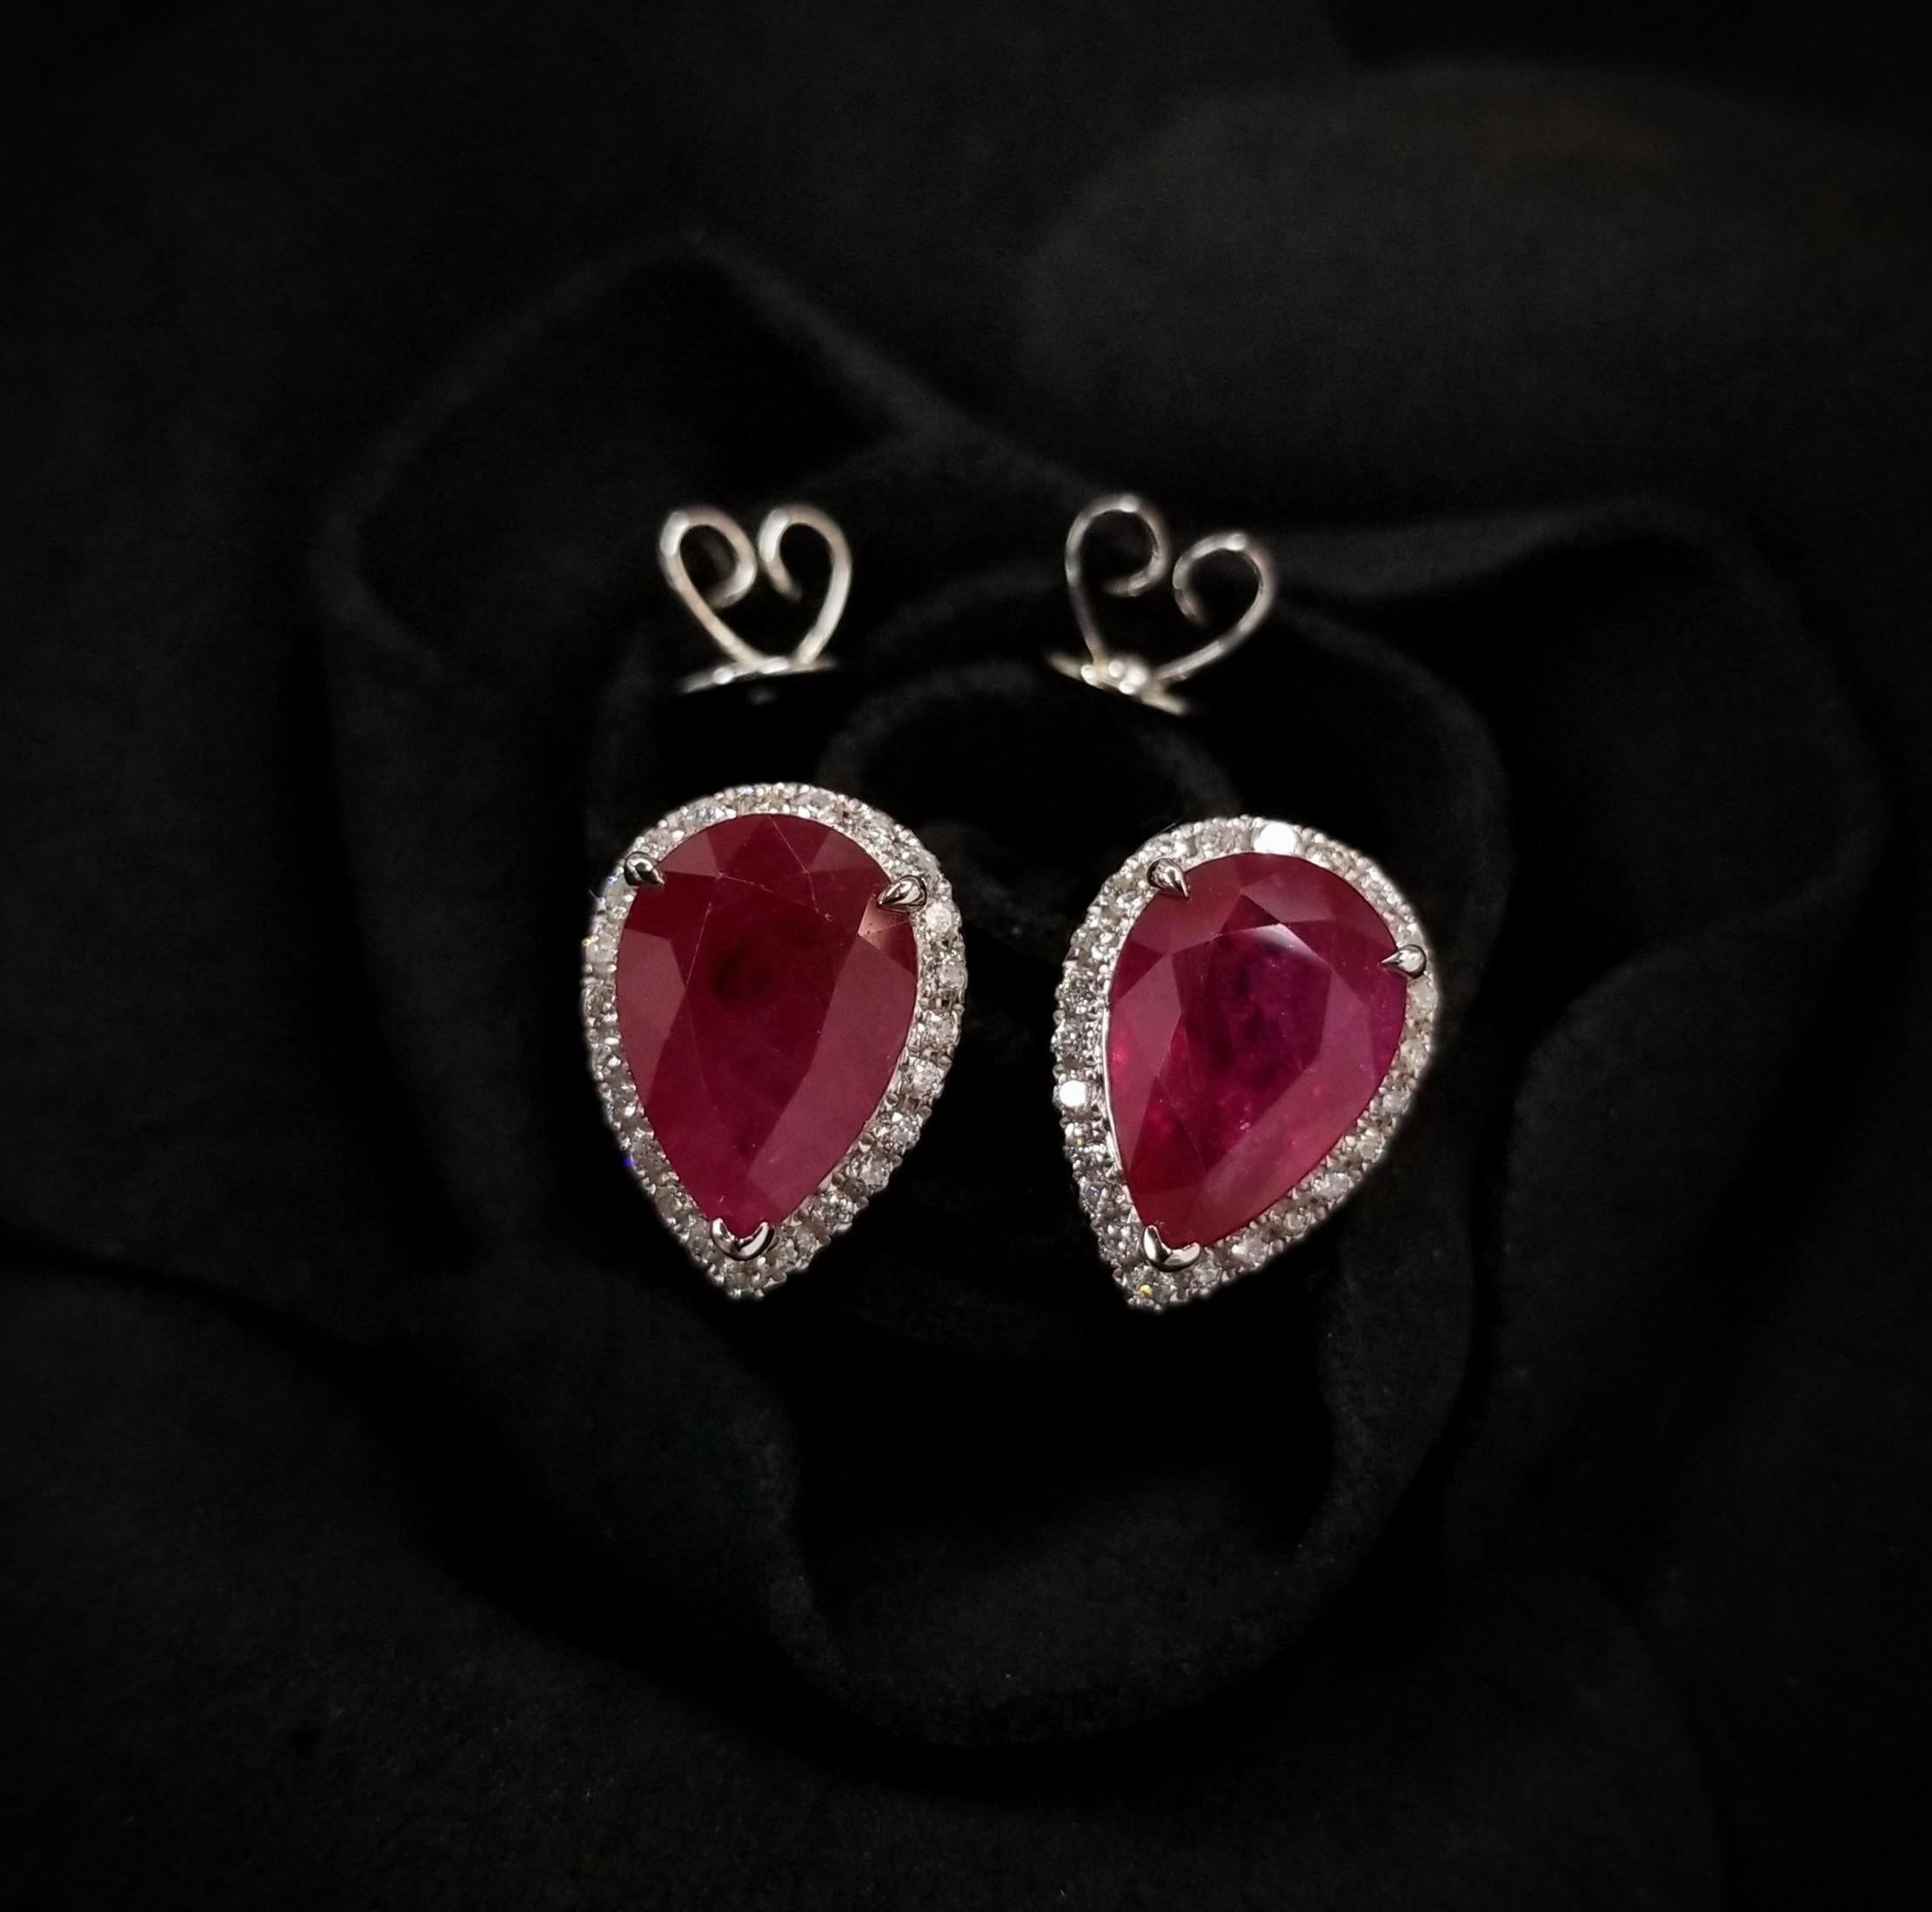 Presenting a sensational pair of earrings adorned with IGI Certified 4.10 Carat Rubies, exceptionally rare in intense purplish red color and captivating pear shape. These exquisite gemstones, known for their rarity and allure, are a true treasure to